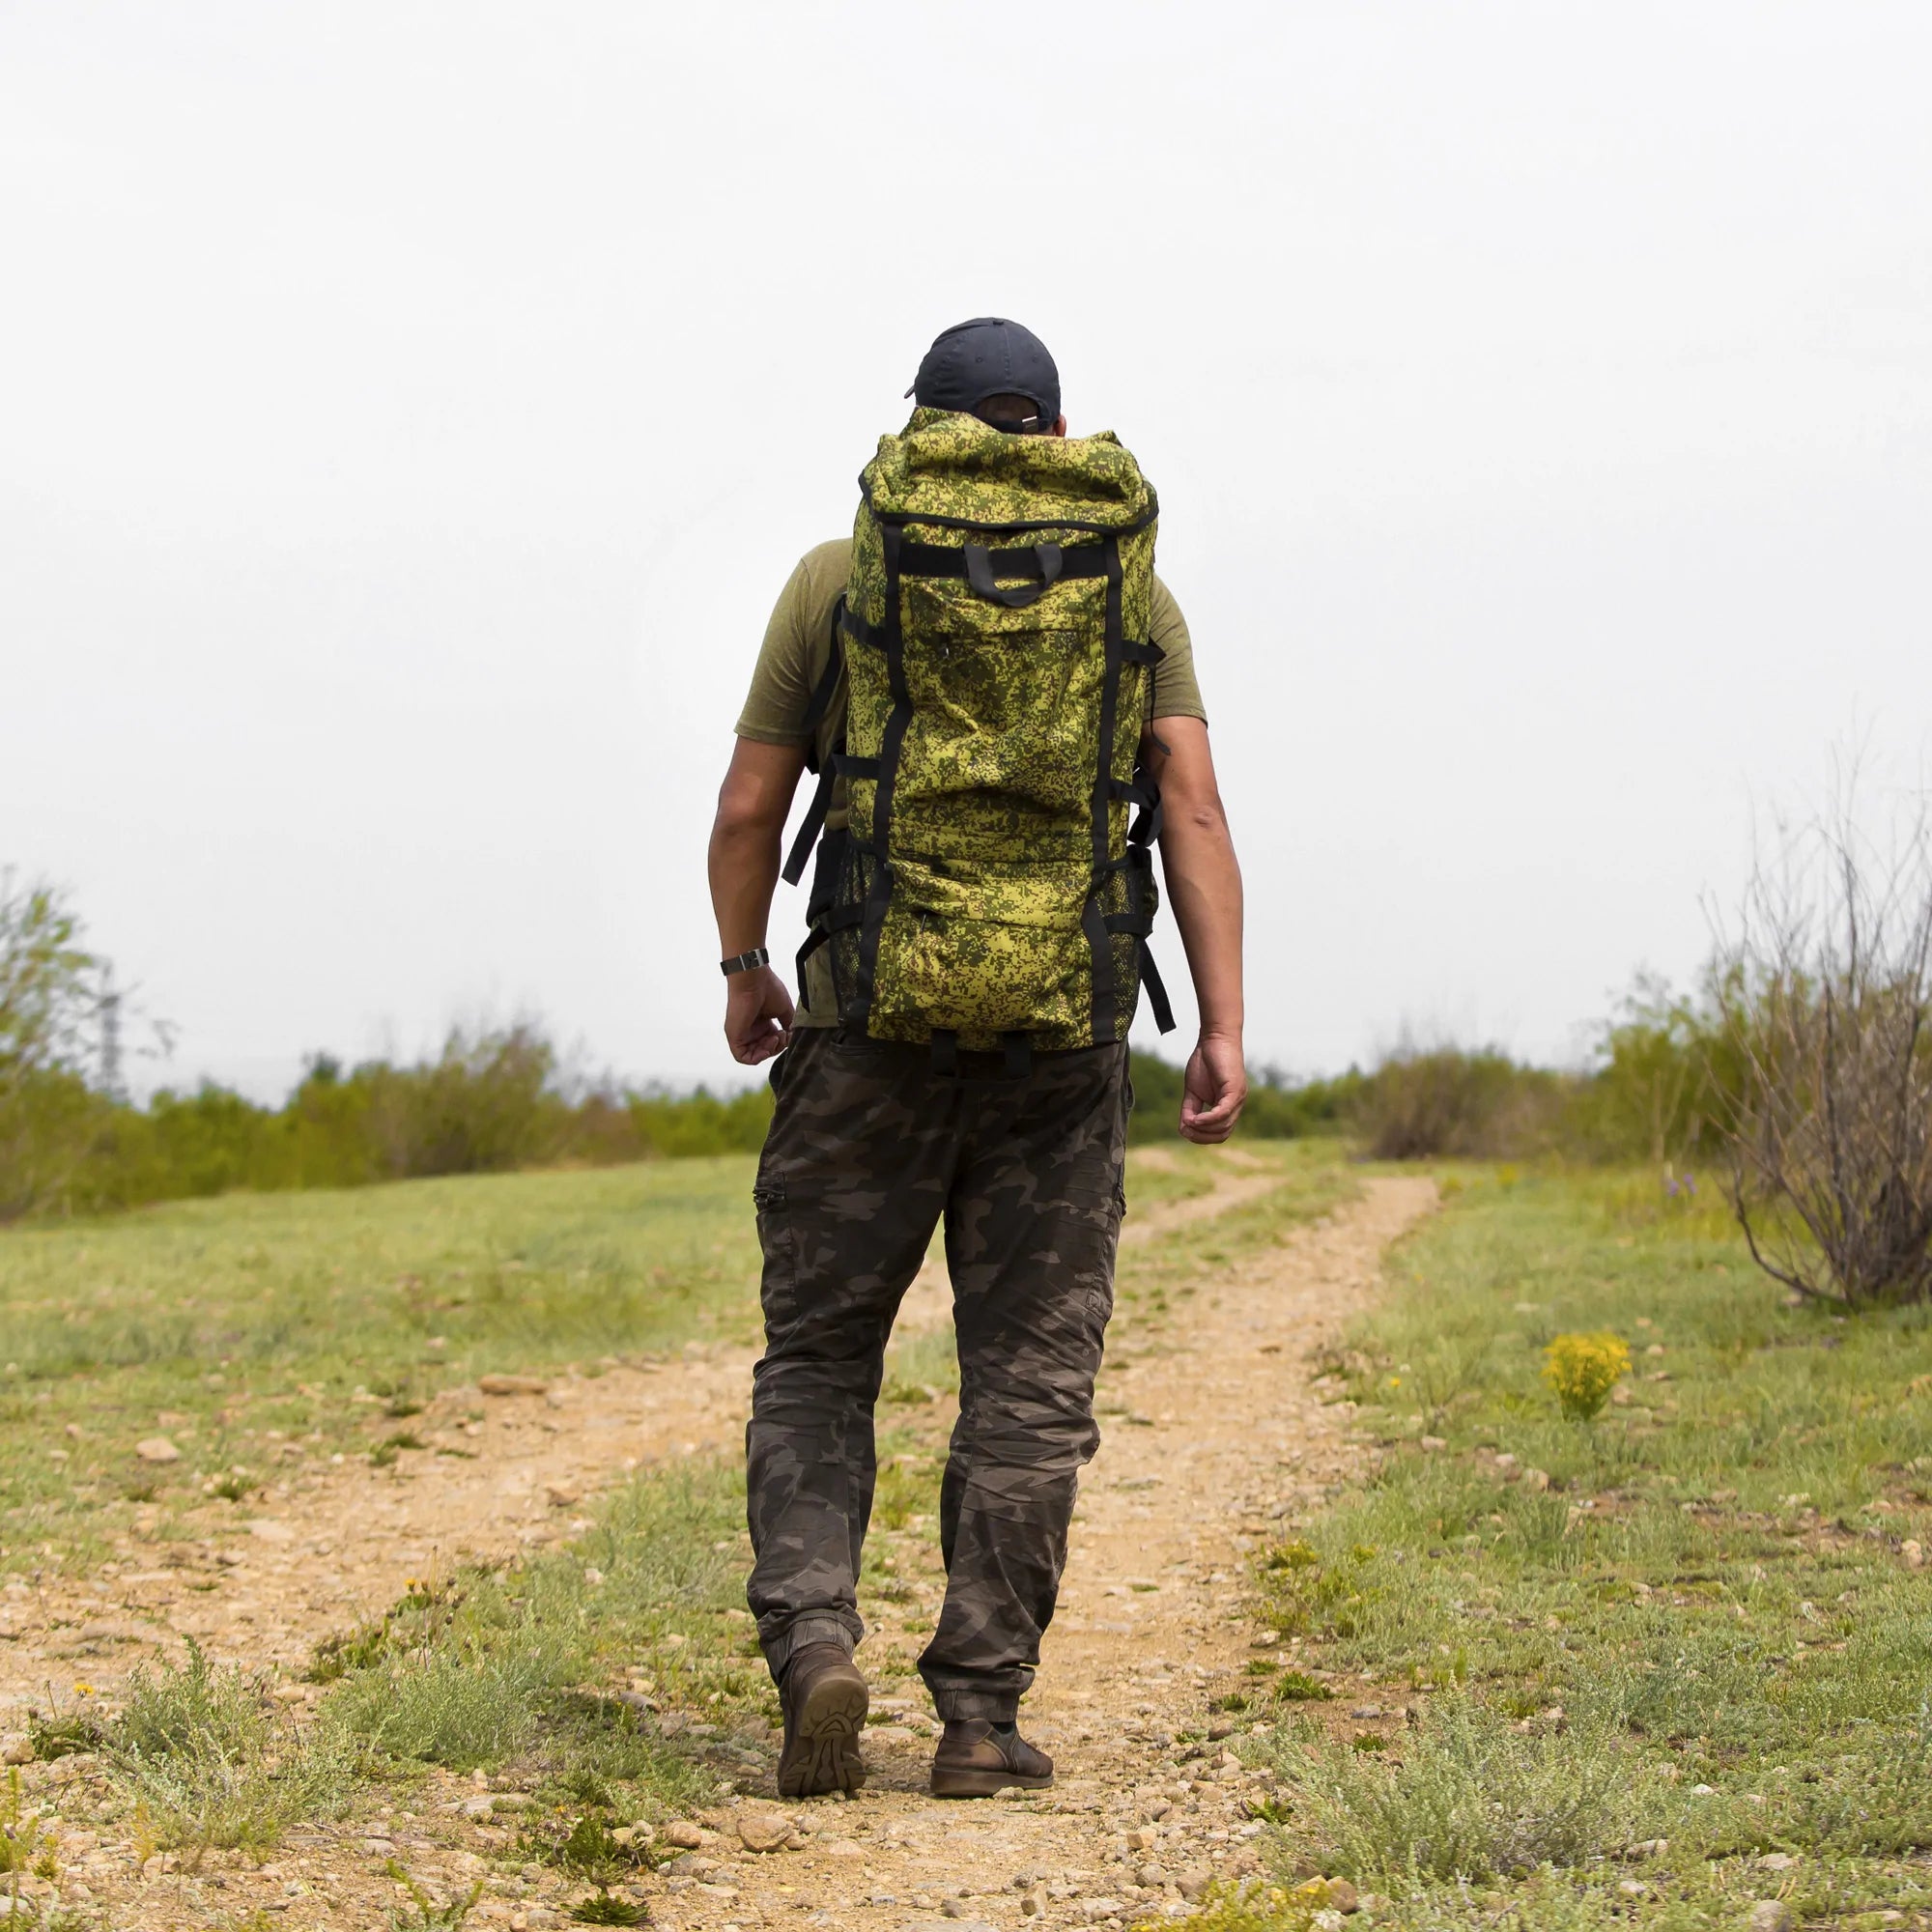 Getting Started with Rucking